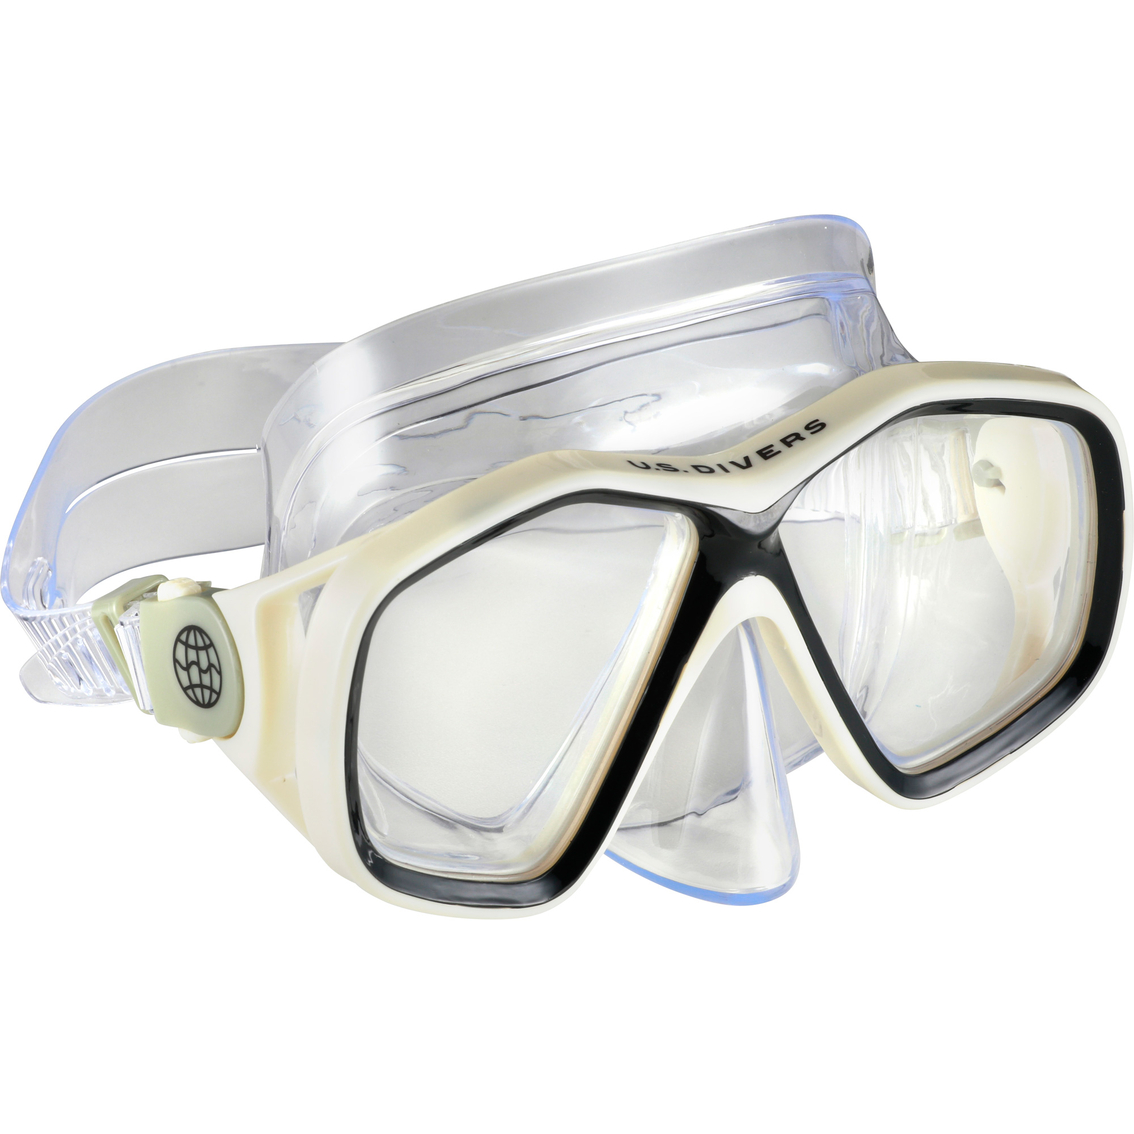 US Divers Redondo DX Snorkeling Combo., Beige and Black - Image 2 of 4